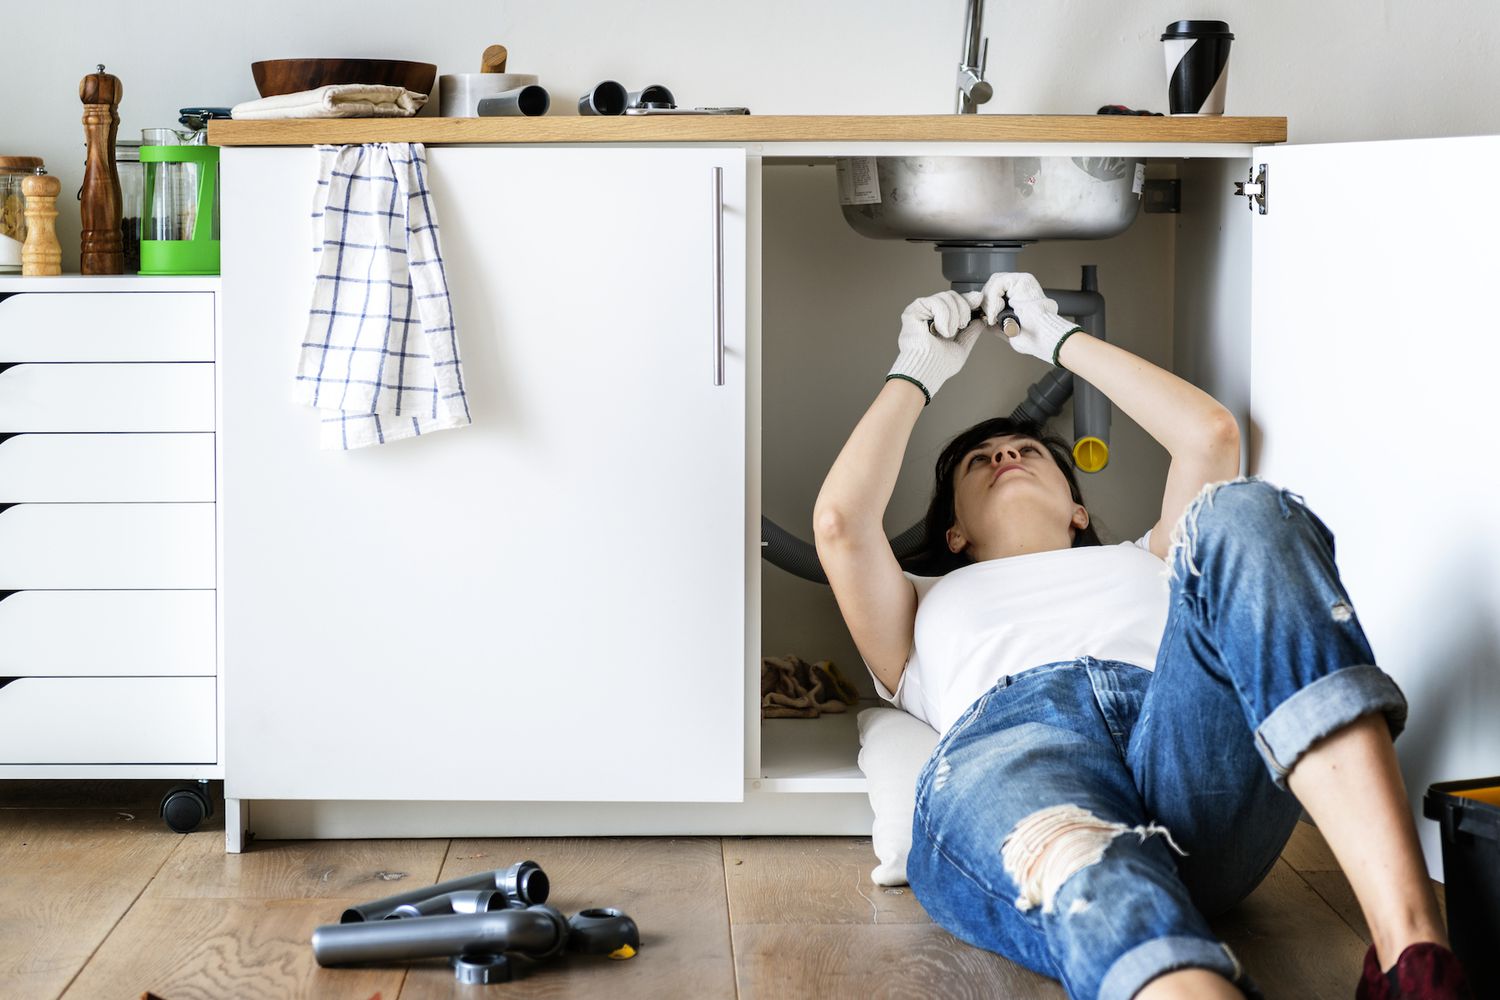 5 DIY Home Repairs for Your Next Free Weekend